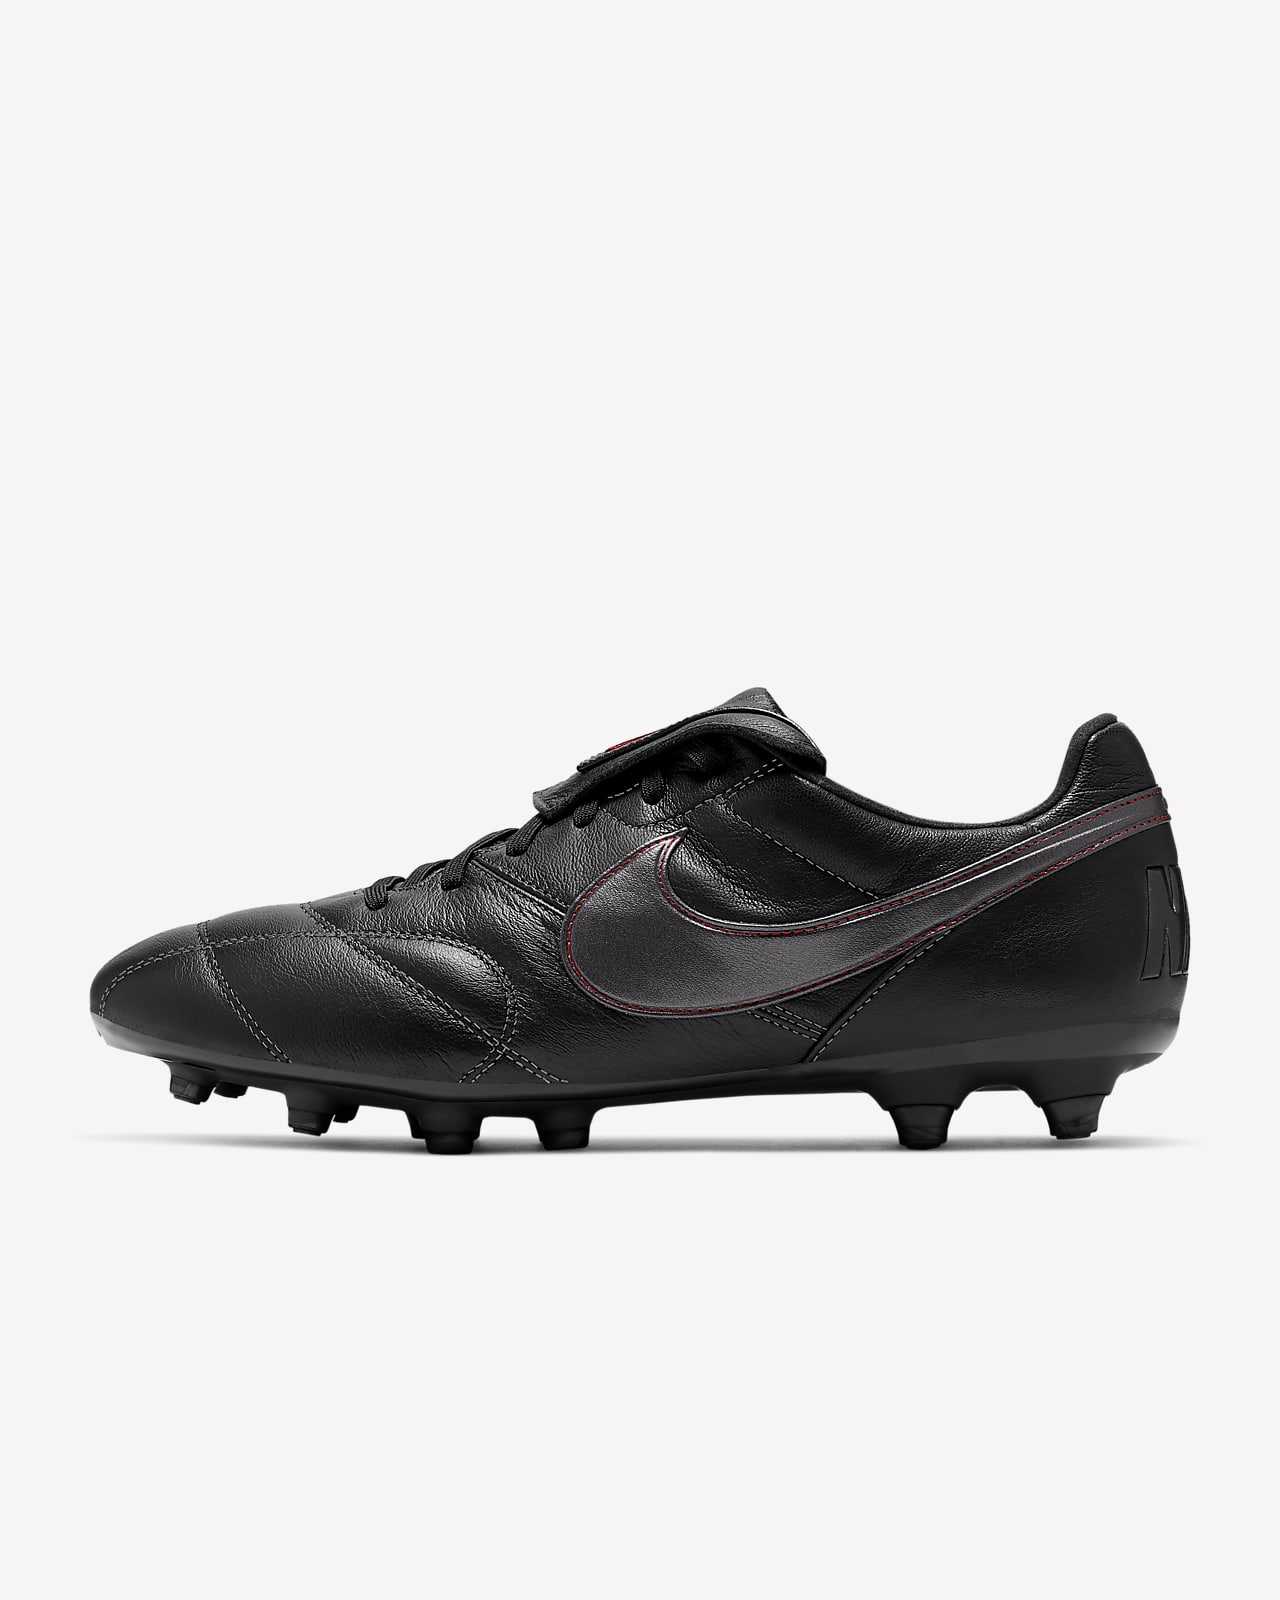 leather nike football boots